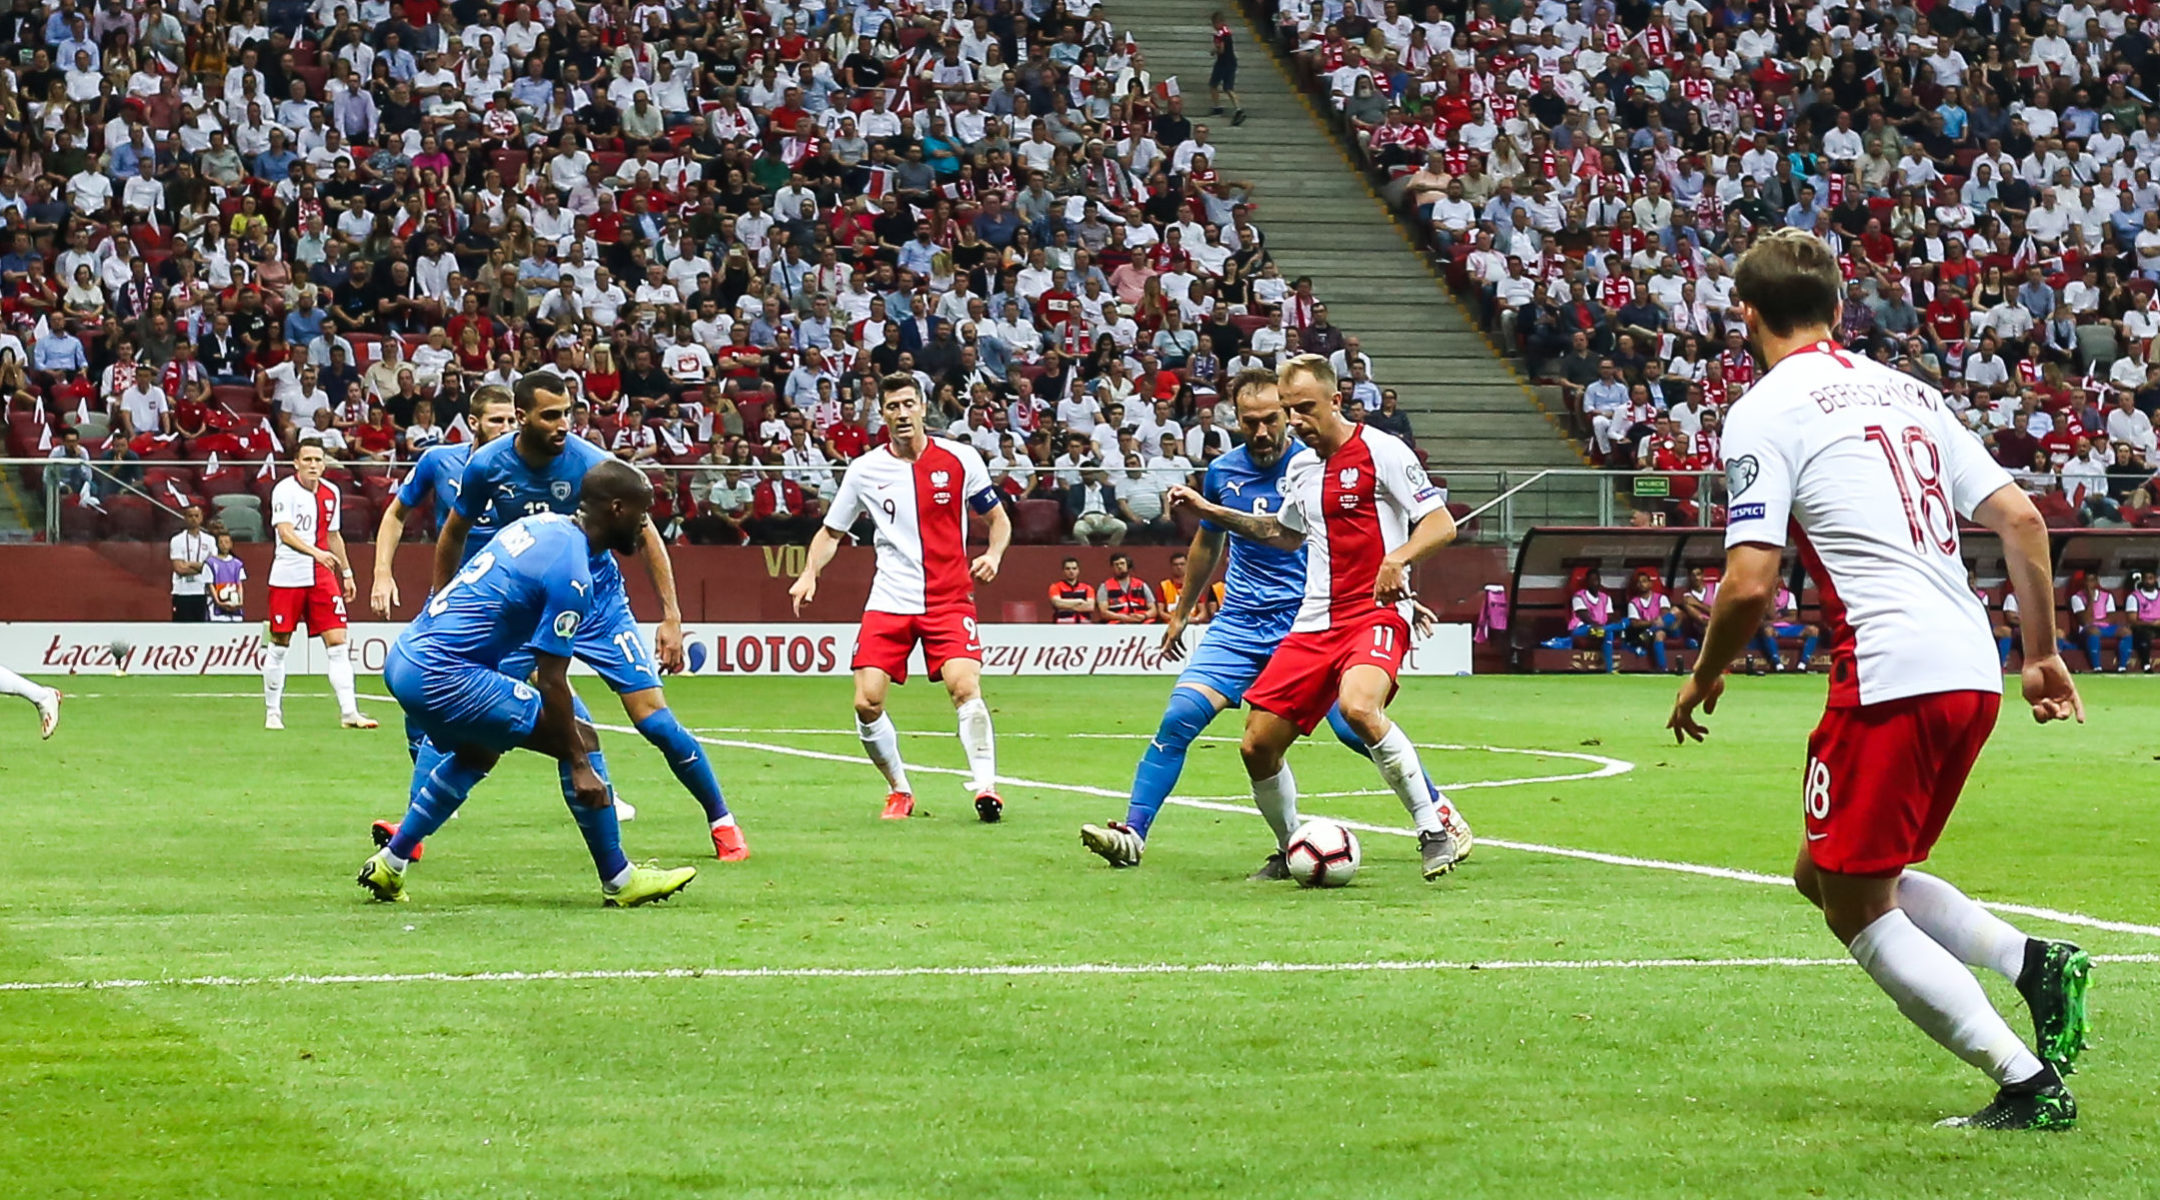 Polish and Israeli soccer players engage in a friendly match in Poland on June 10, 2019. (Photo by Foto Olimpik/NurPhoto via Getty Images)